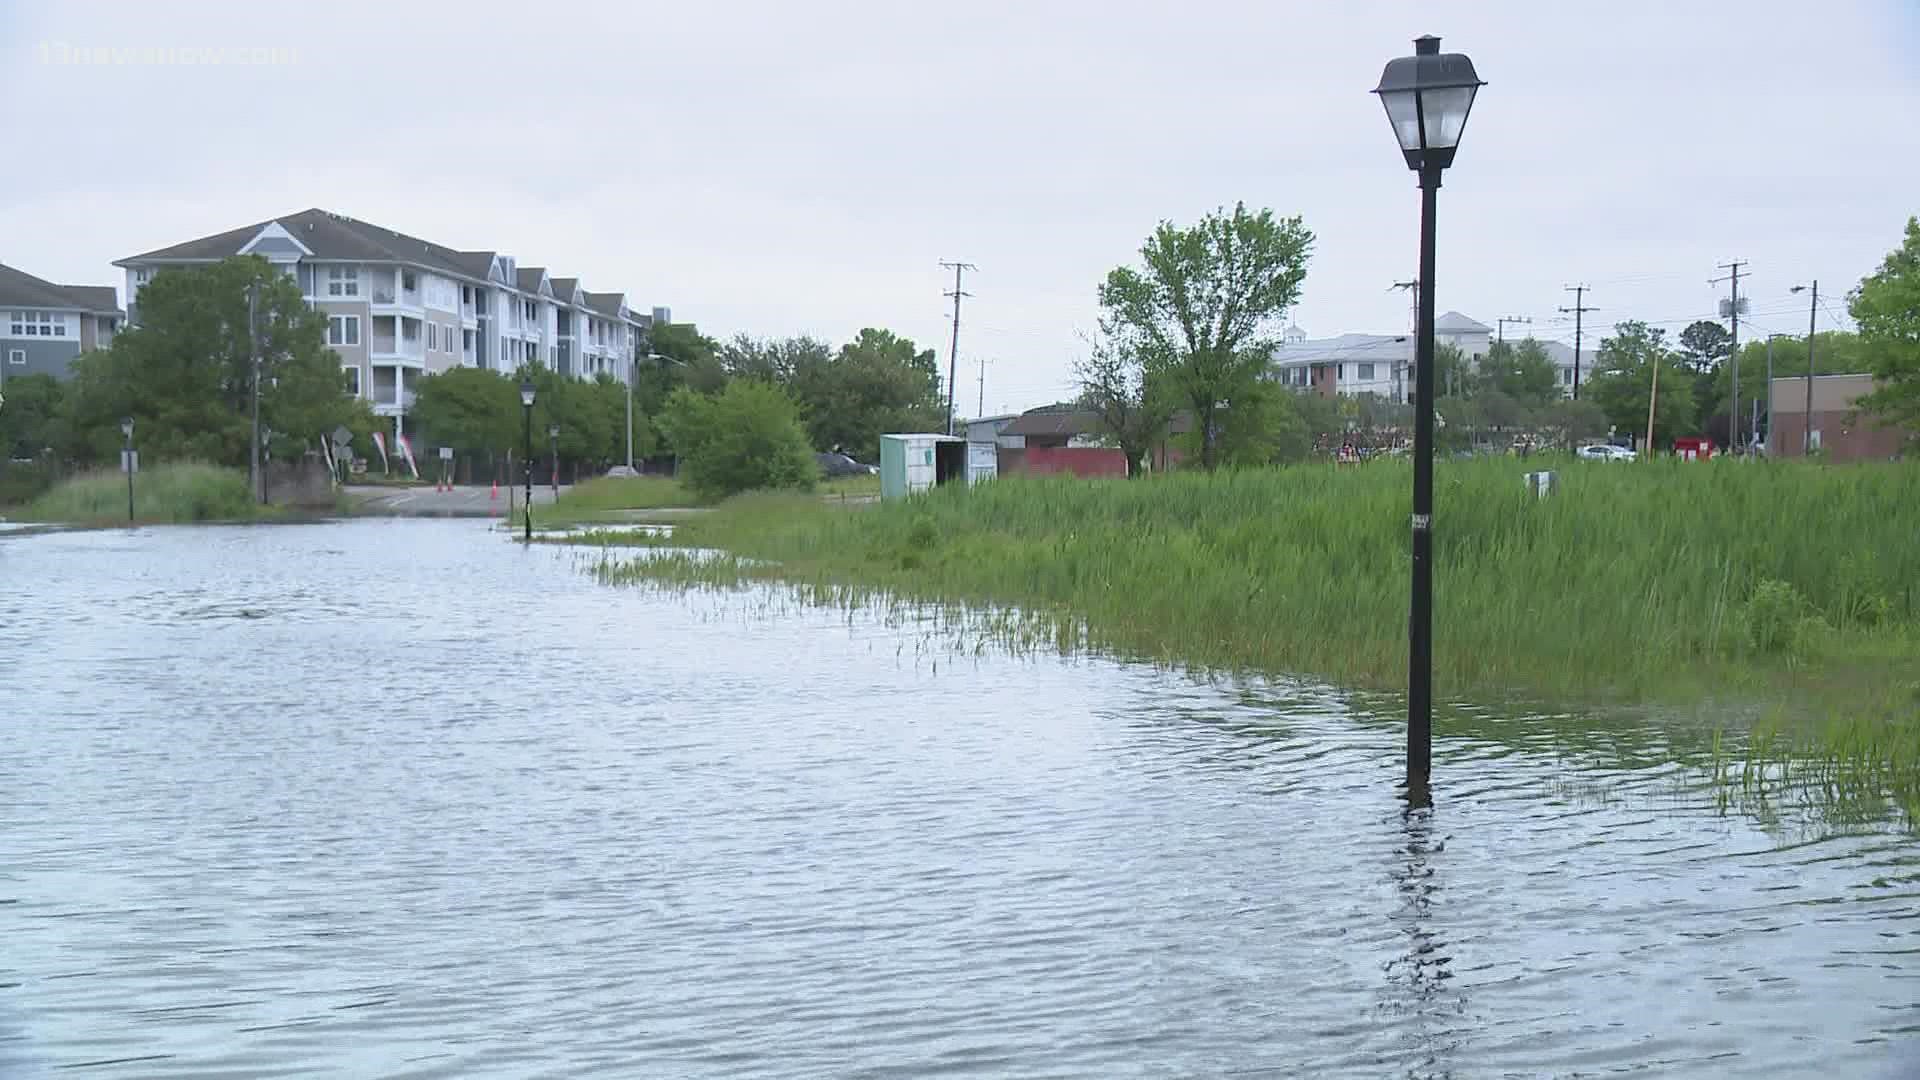 Across Hampton Roads, city public works crews are on standby for potential flooding issues.